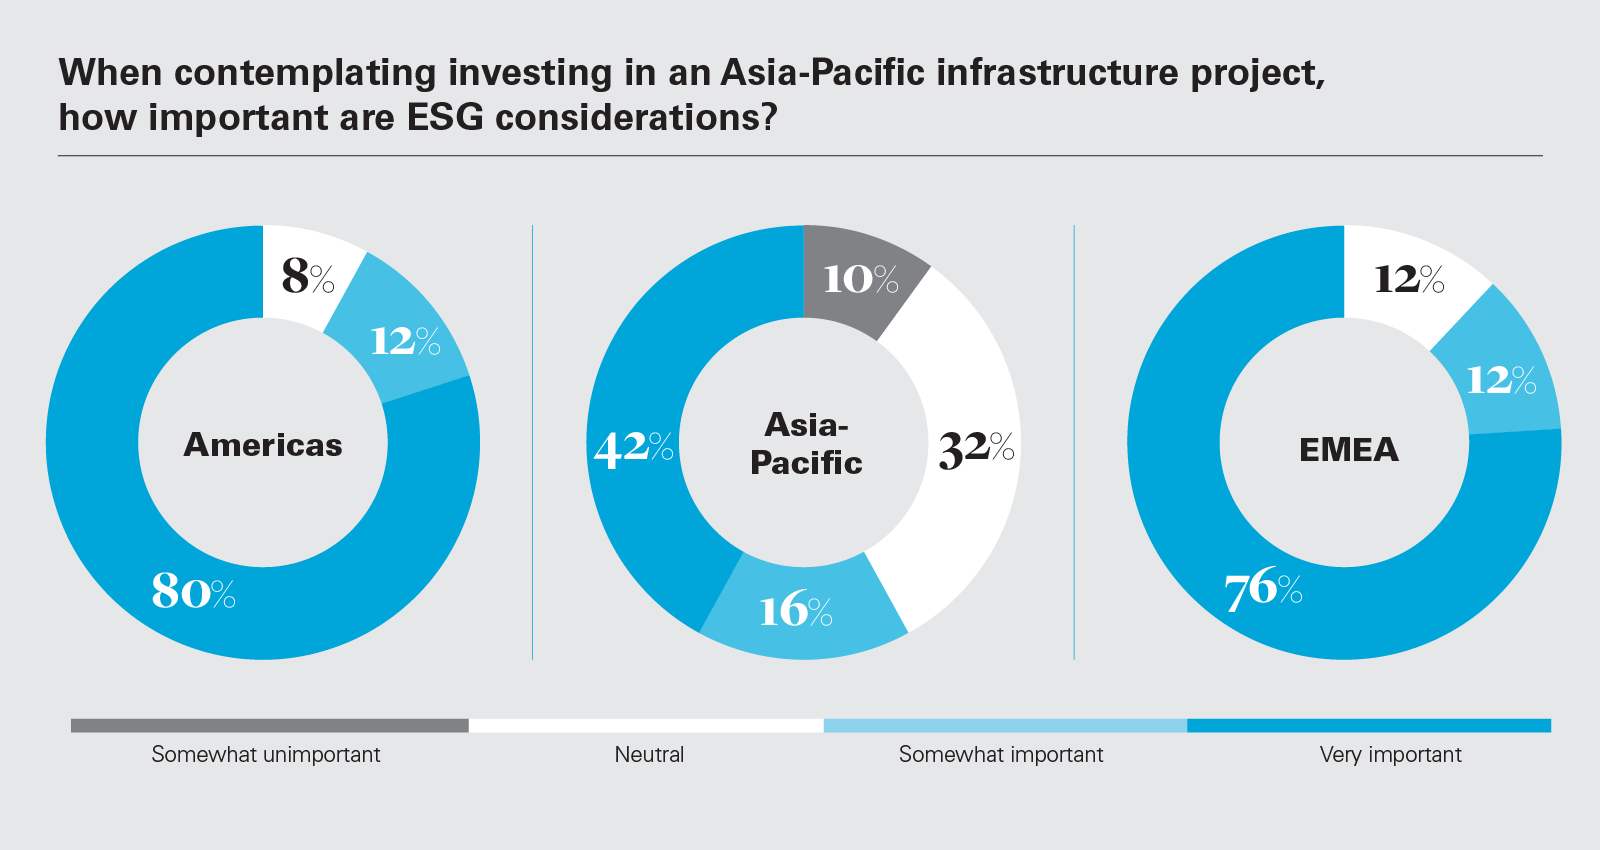 When contemplating investing in an Asia-Pacific infrastructure project, how important are ESG considerations?